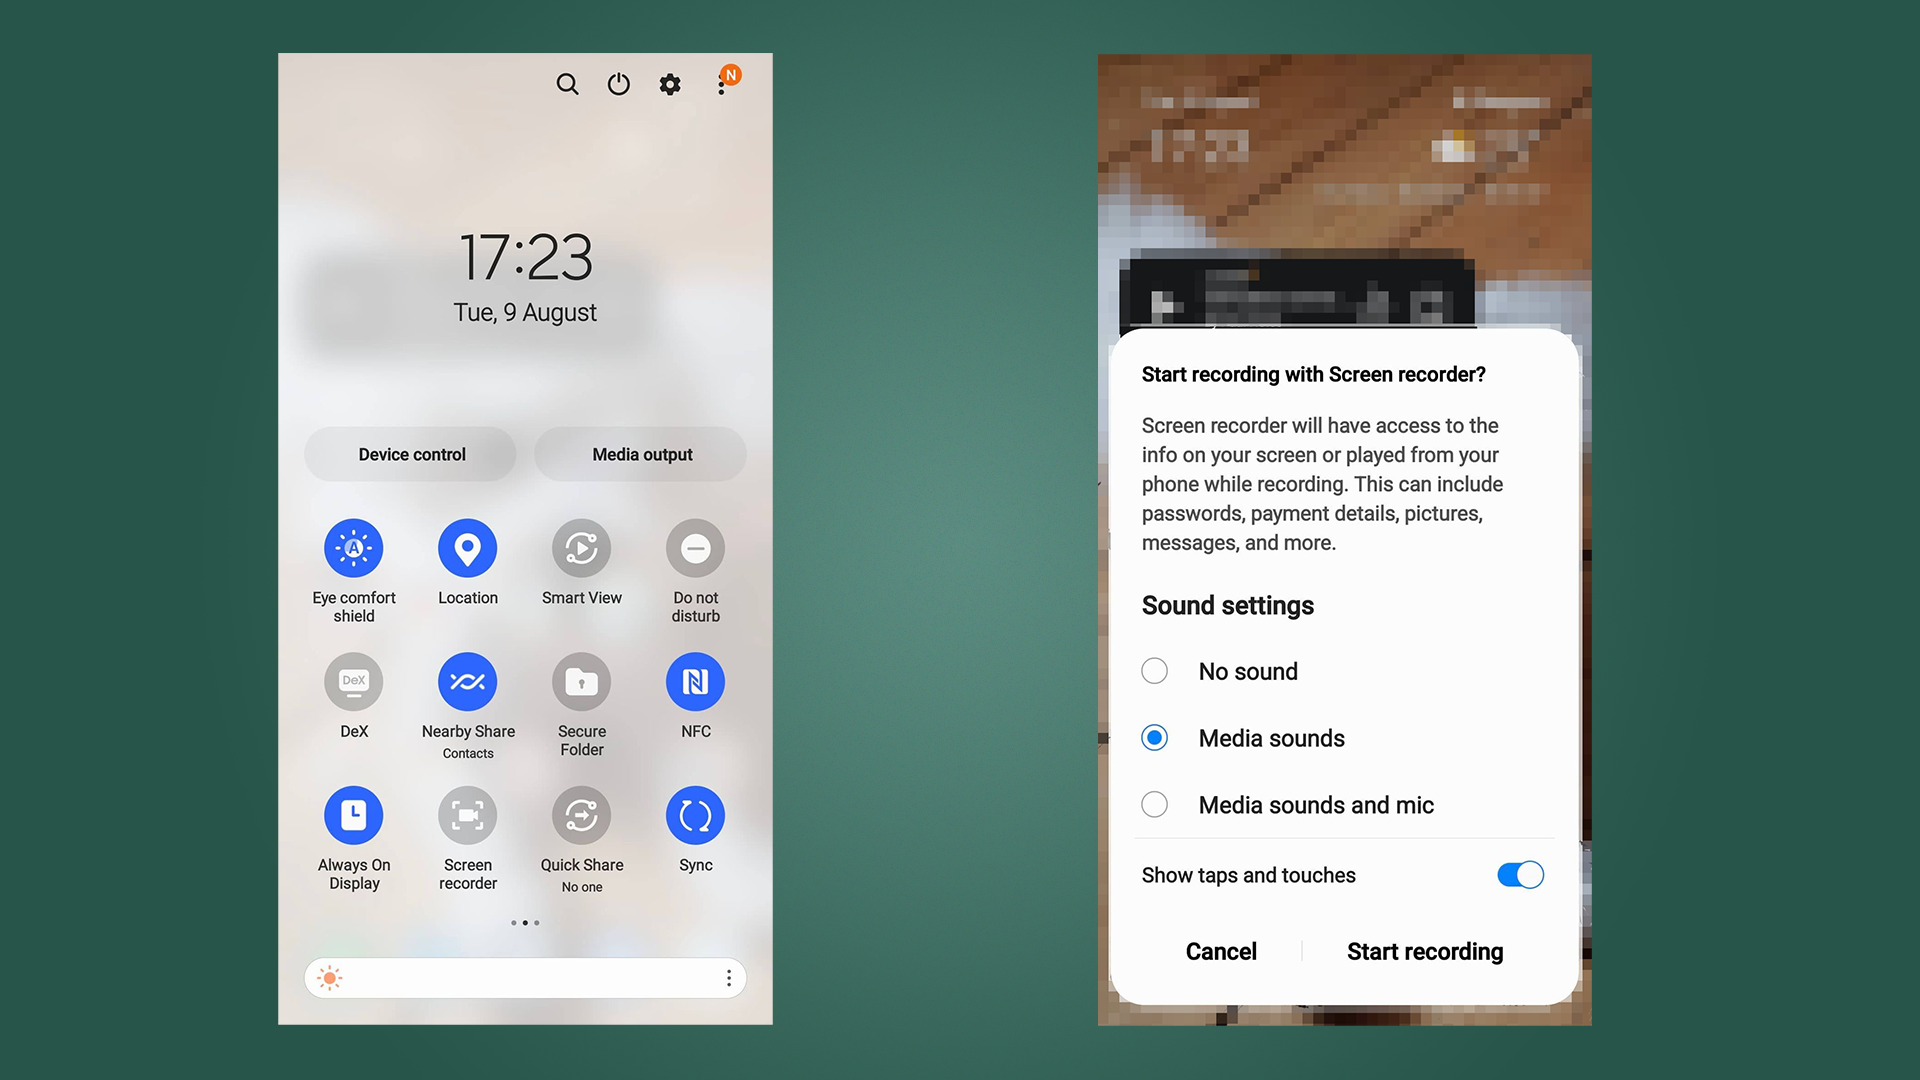 Break apart Thank you for your help angle How to record your screen on Android for free | TechRadar